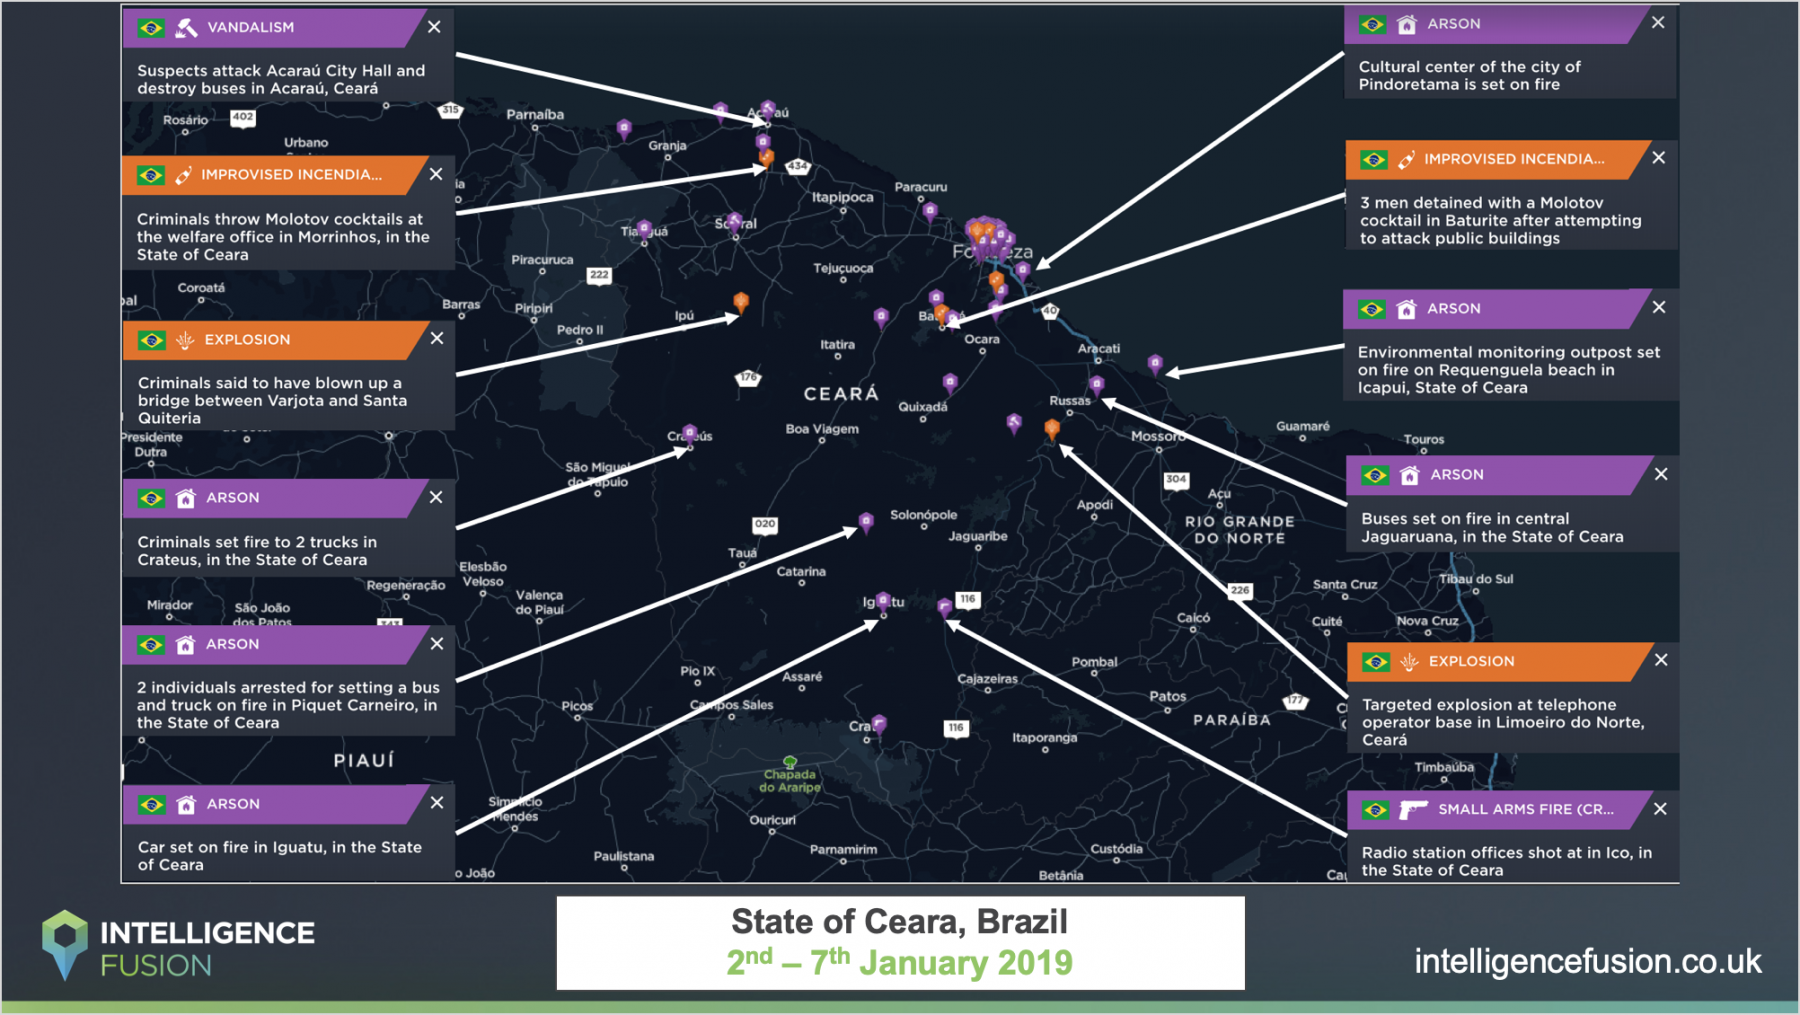 Examples of violent attacks and crime during January 2019 in State of Ceará, Brazil 